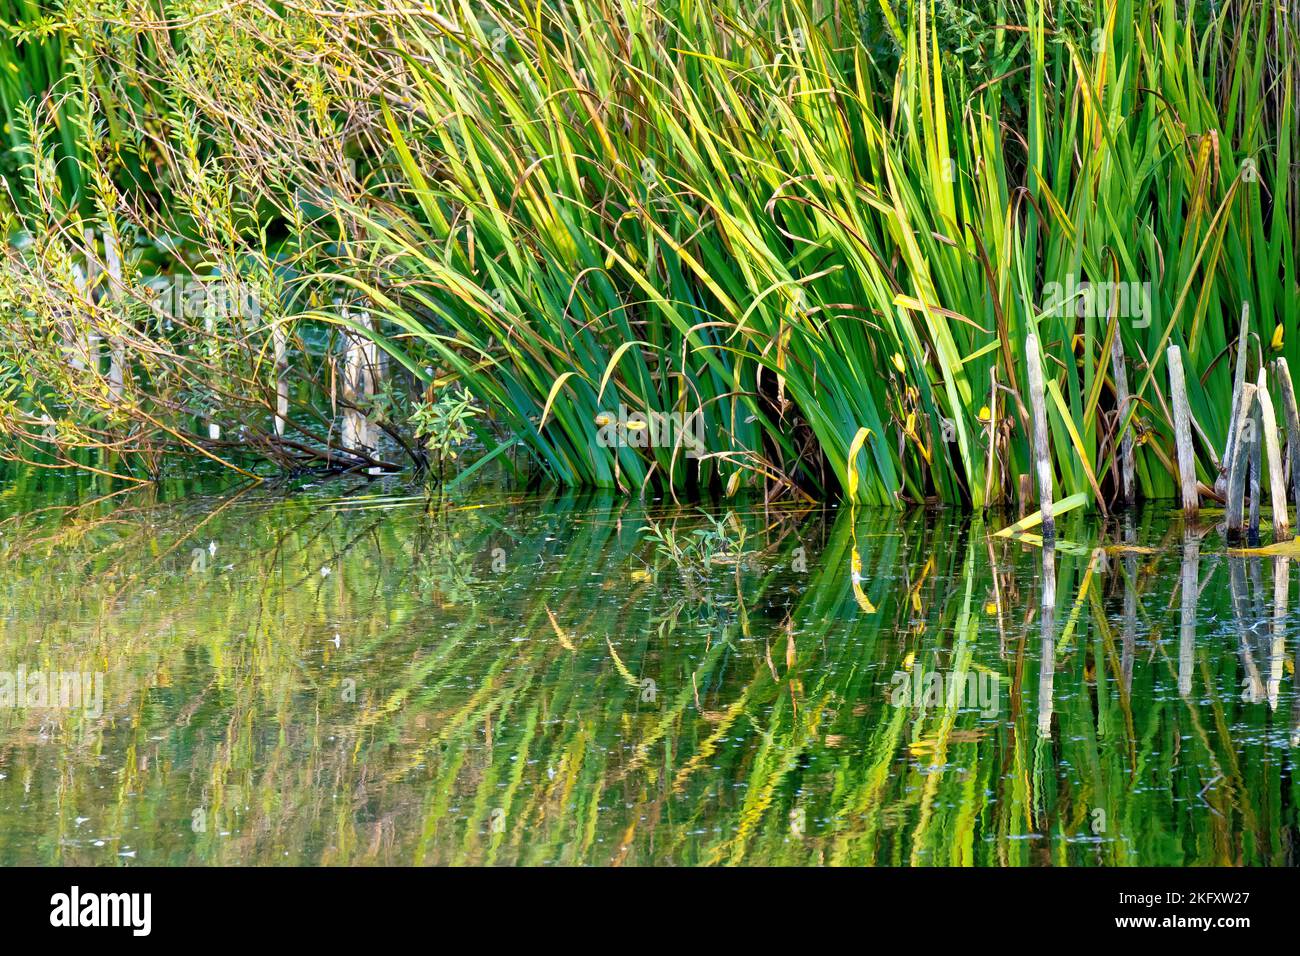 The vegetation and plantlife growing at the edge of a pond reflected in the still water, producing a very painterly effect. Stock Photo